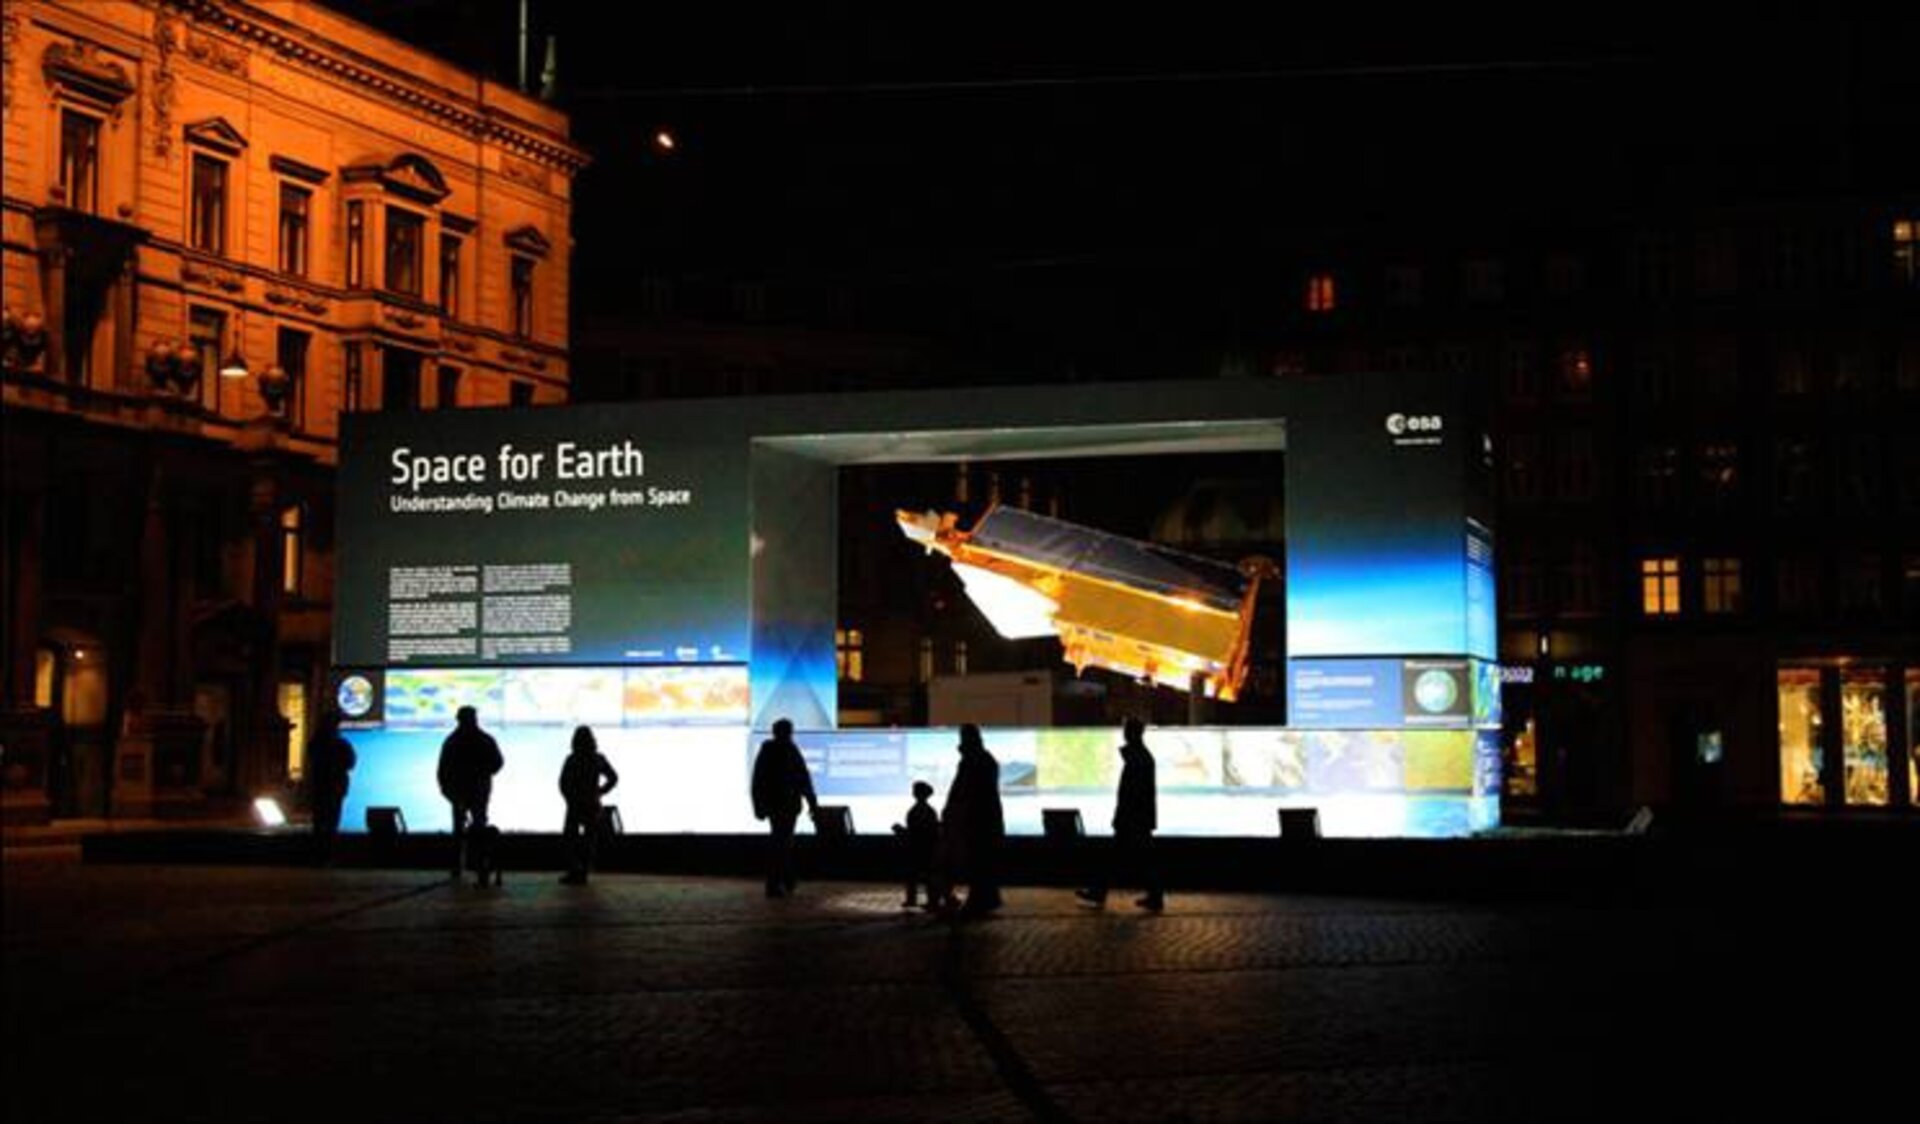 Space for Earth exhibition in the night